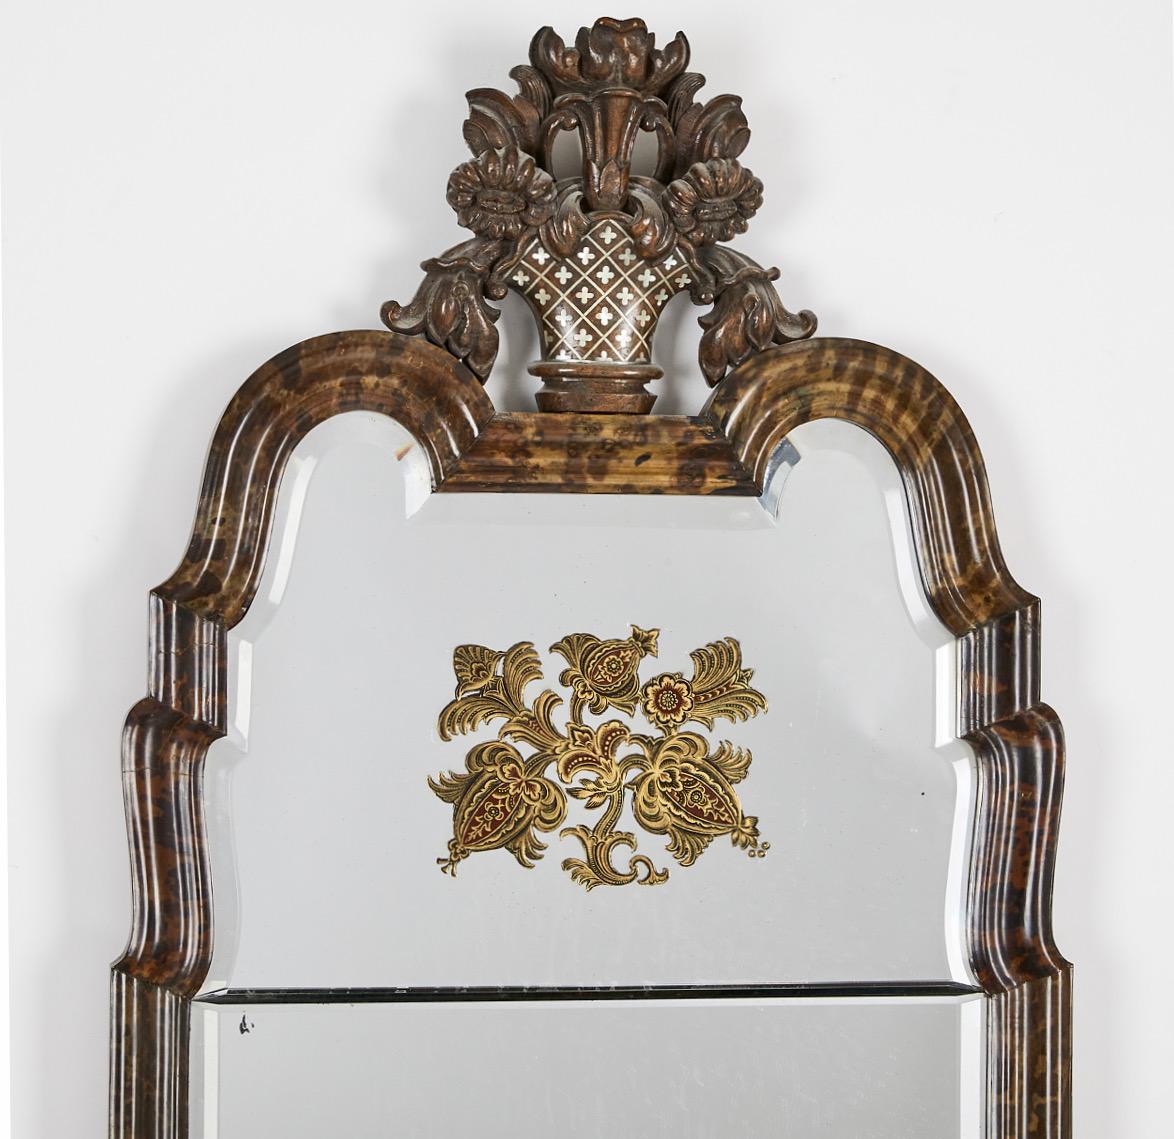 An important Swedish mirror made for The Stockholm Exhibition, 1930 (Stockholmsutställningen). Veneered with tortoise-shell, cut and engraved mirror glass with floral decoration in gold and red, the sculpted top carved in elm root with inlaid pewter